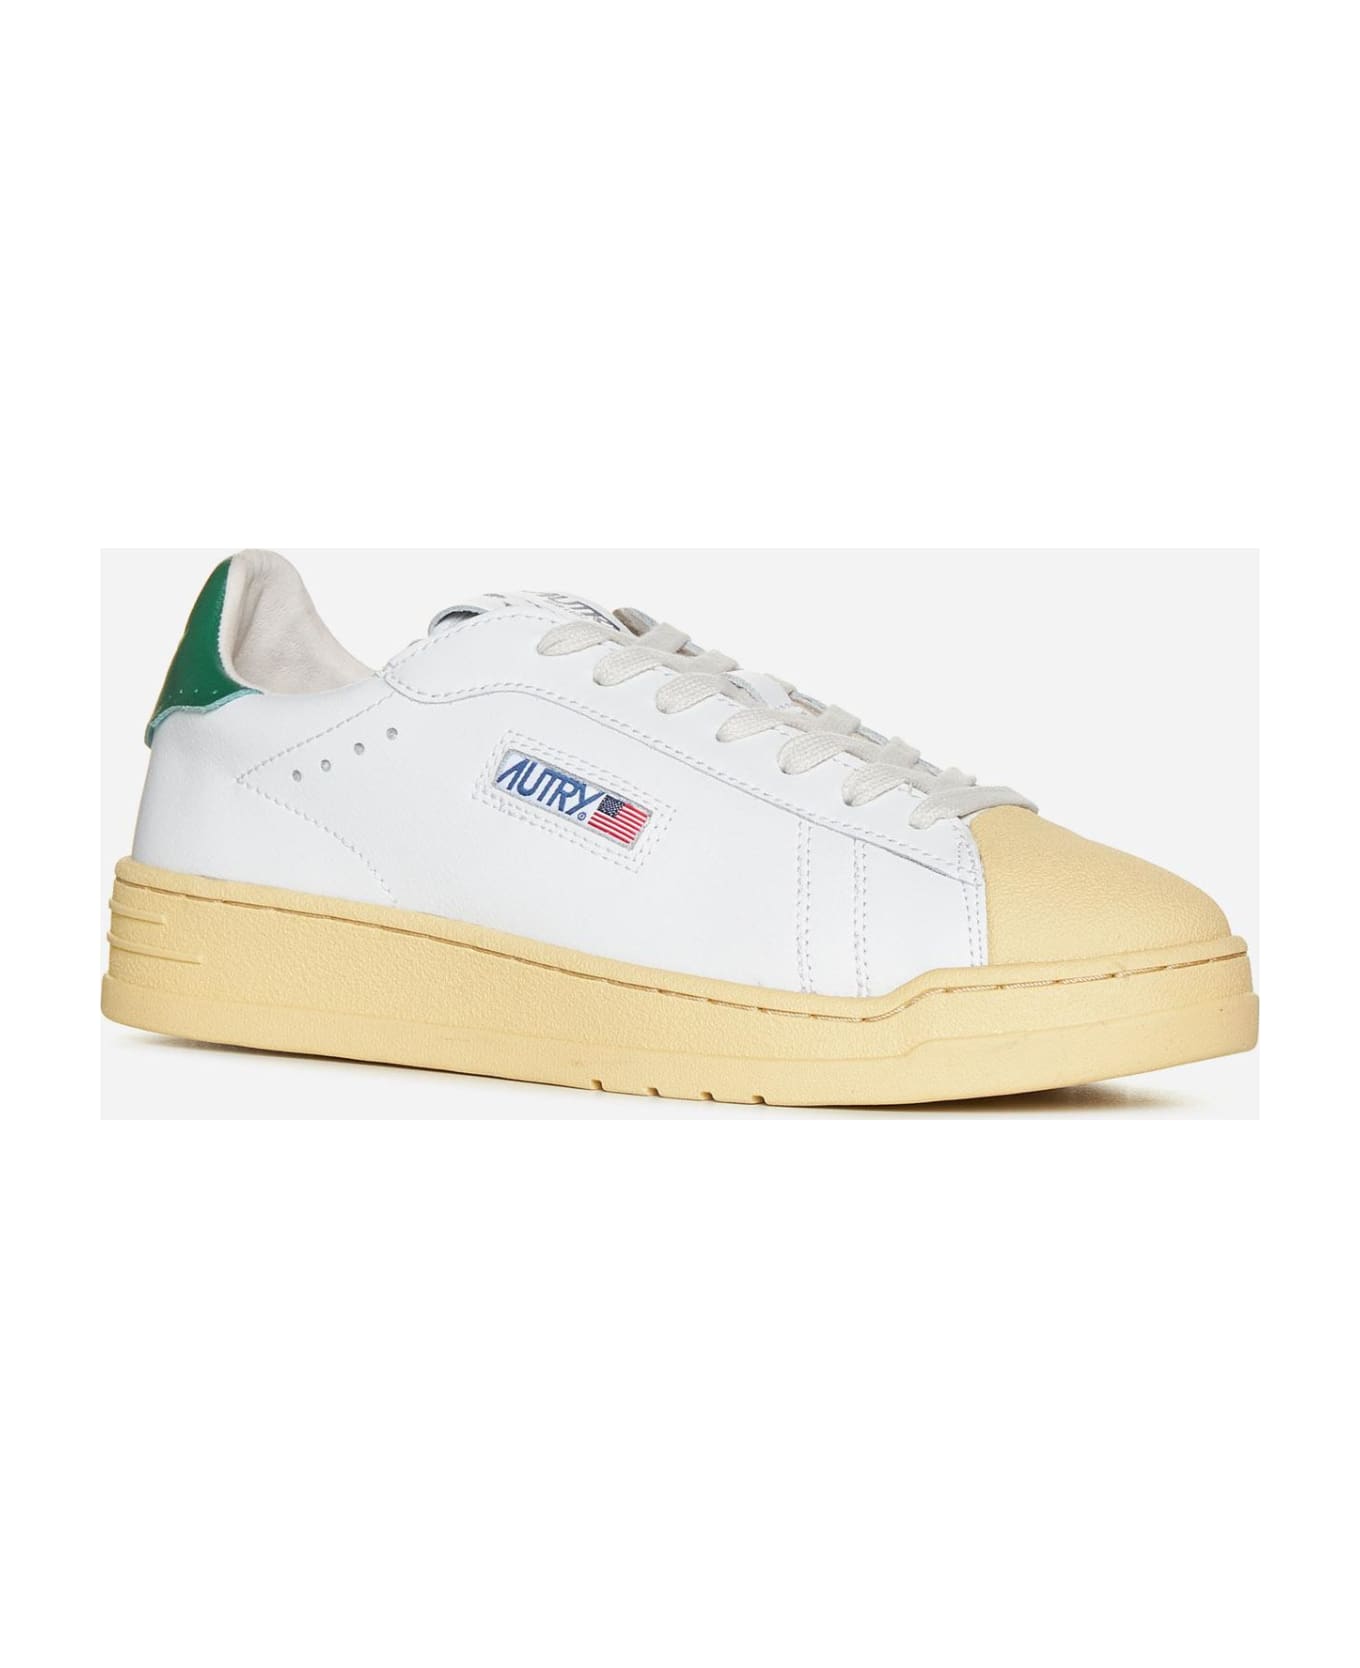 Autry Bob Lutz Low-top Leather Sneakers - White, green